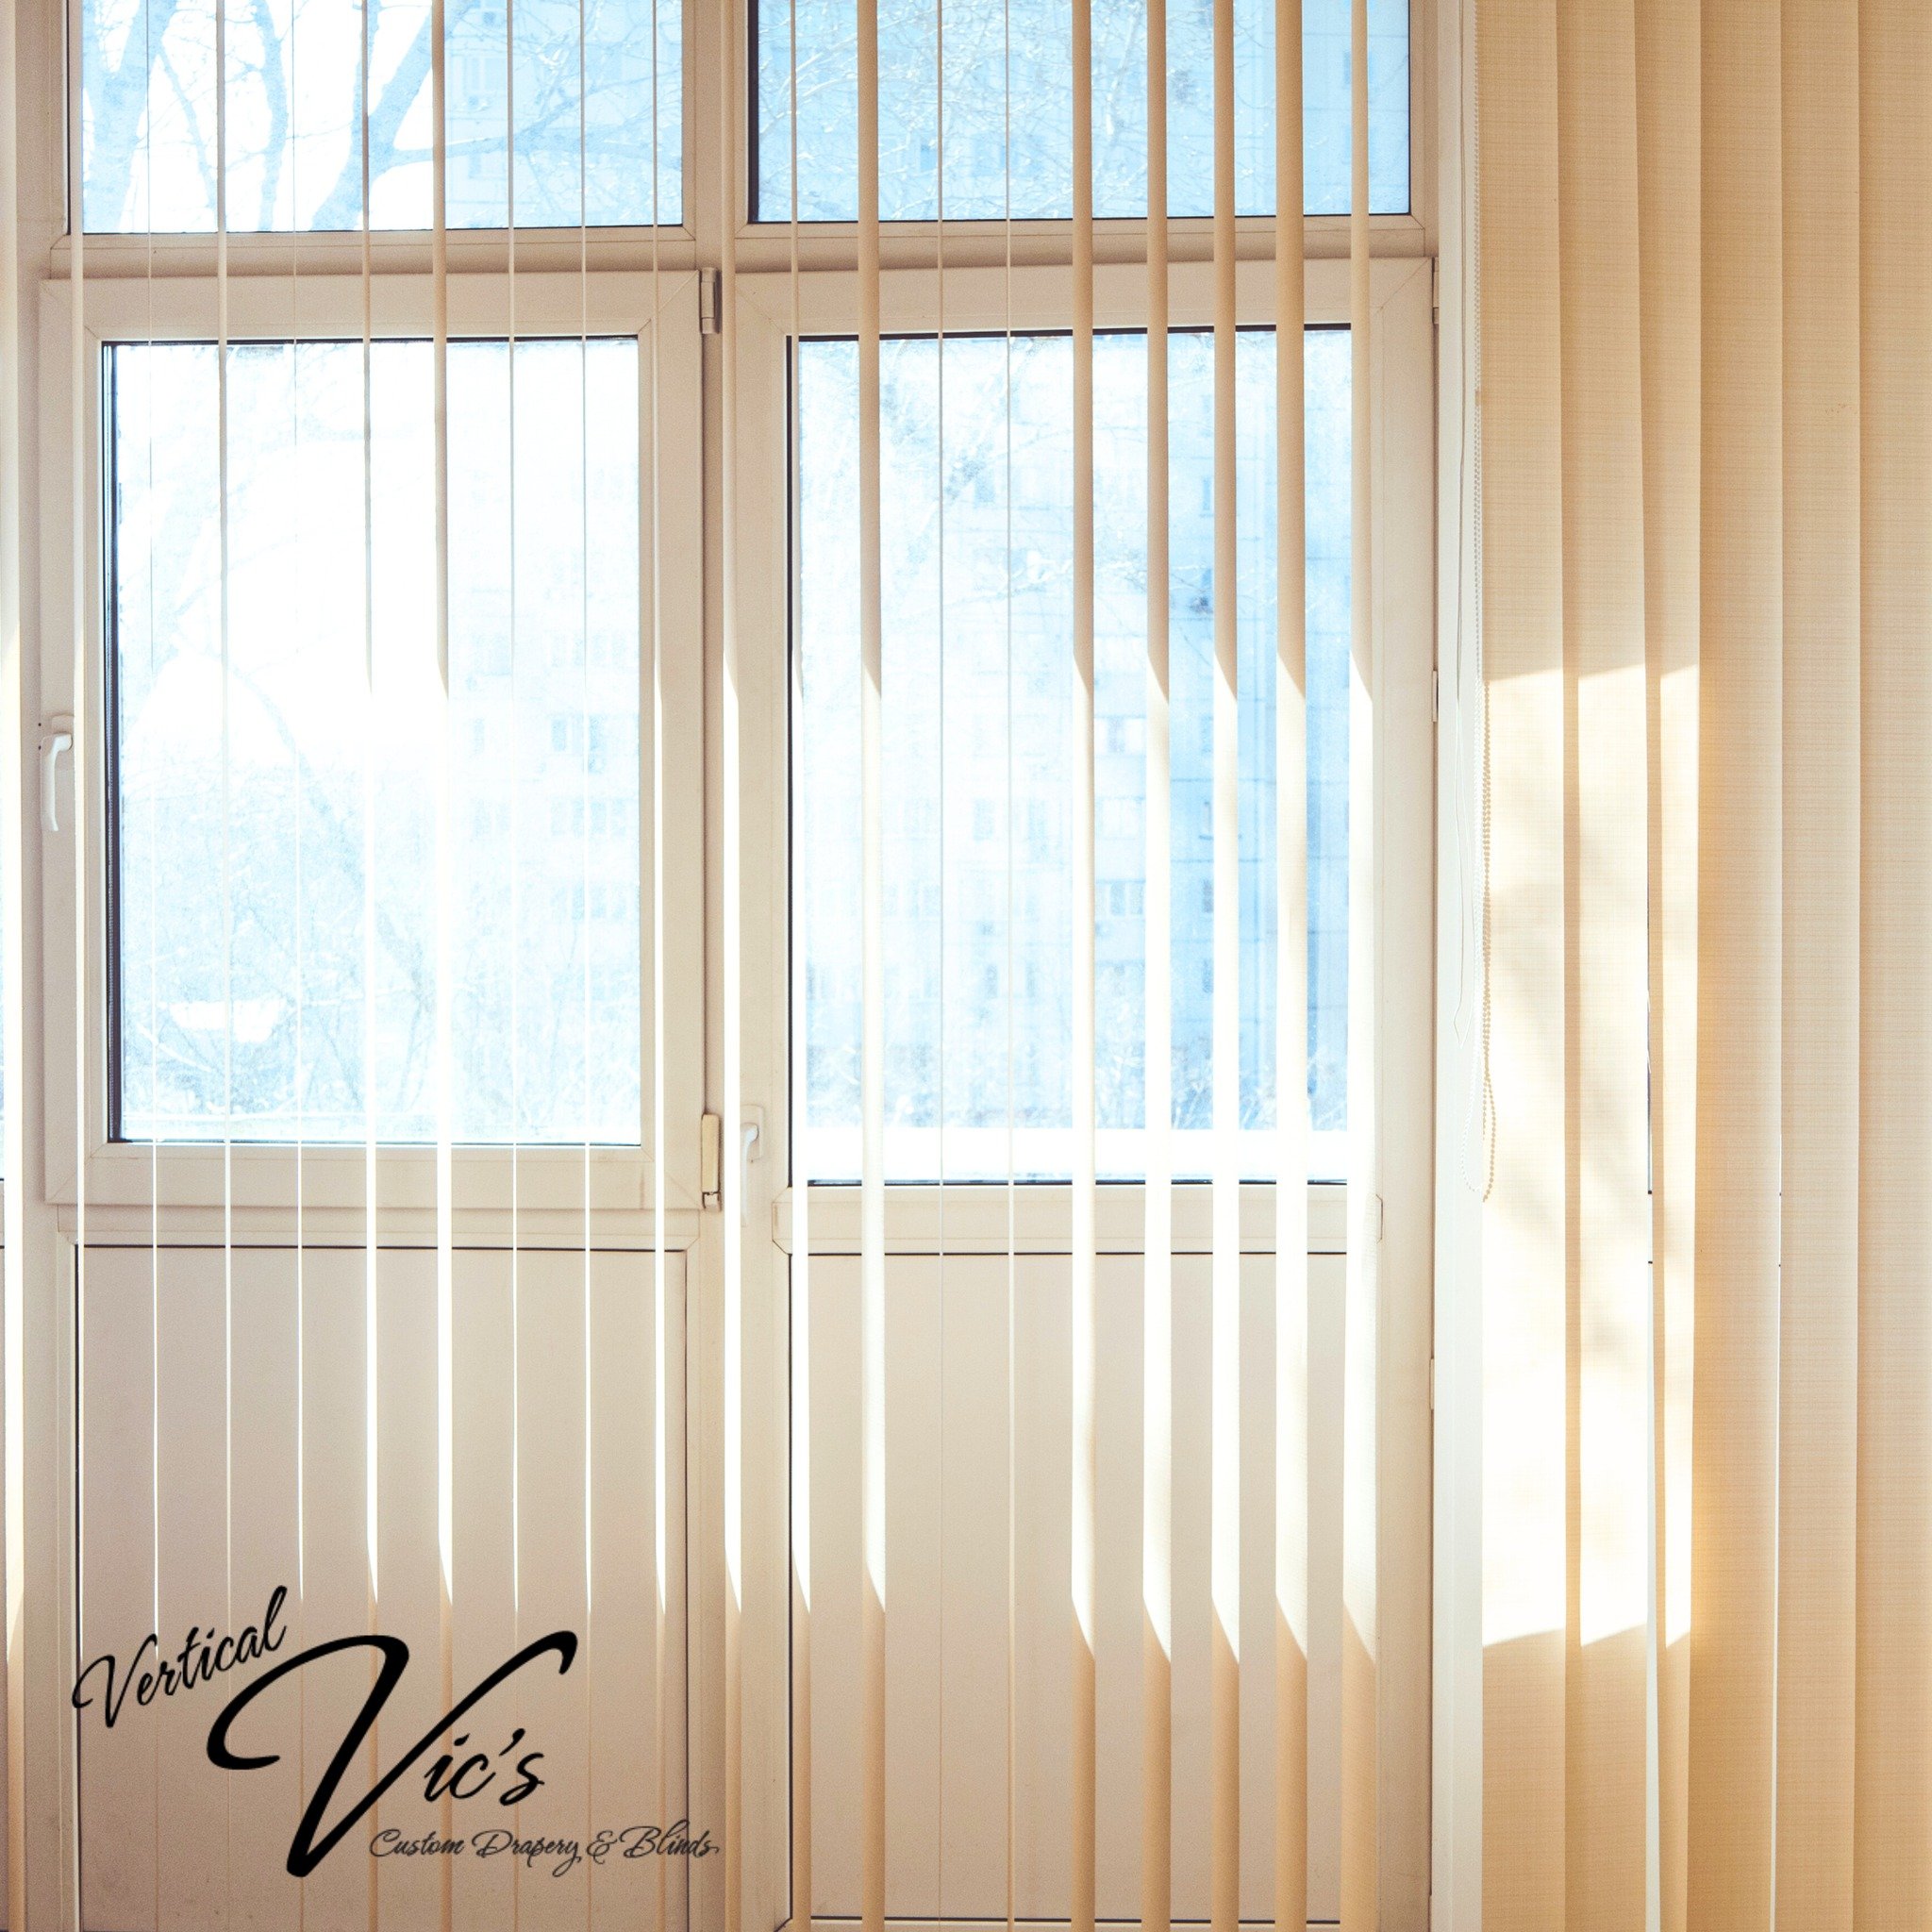 Looking to enhance those tall, expansive windows? Vertical Blinds are your stylish solution! Ideal for floor-to-ceiling windows and sliding glass doors, they offer optimal light control and privacy with a touch of modern flair. At Vertical Vic&rsquo;